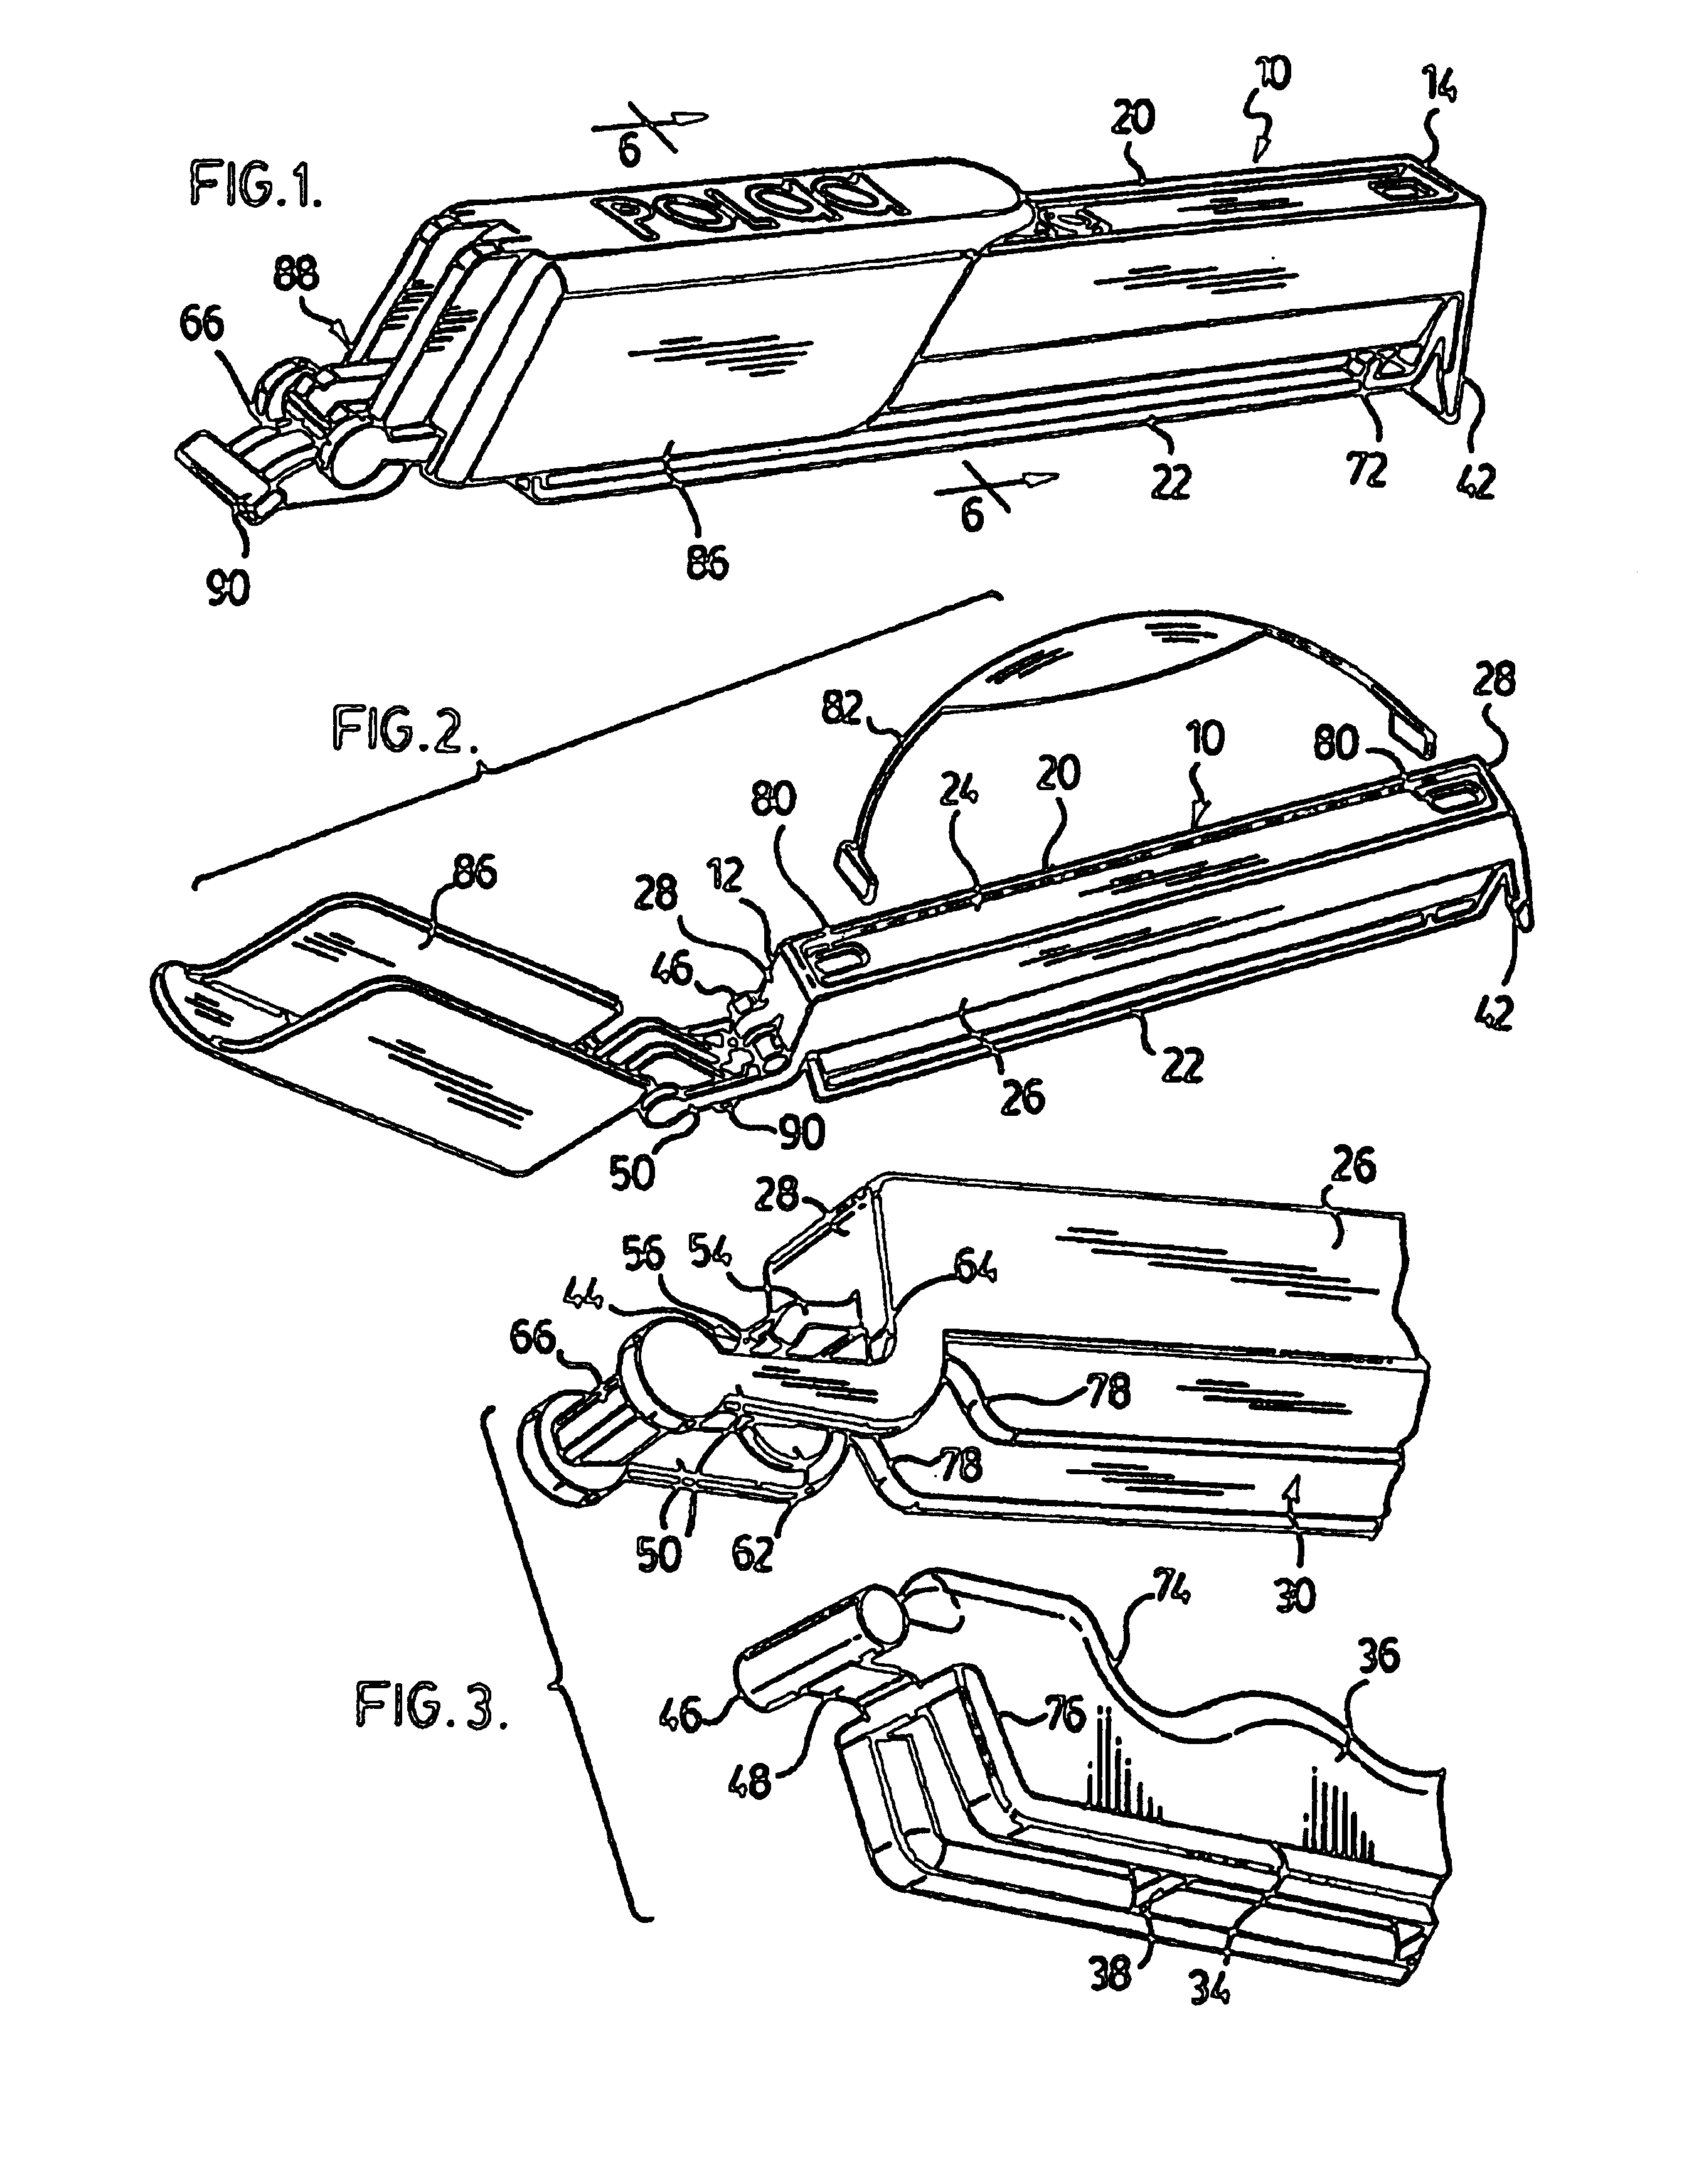 Hinged clip with separable jaws